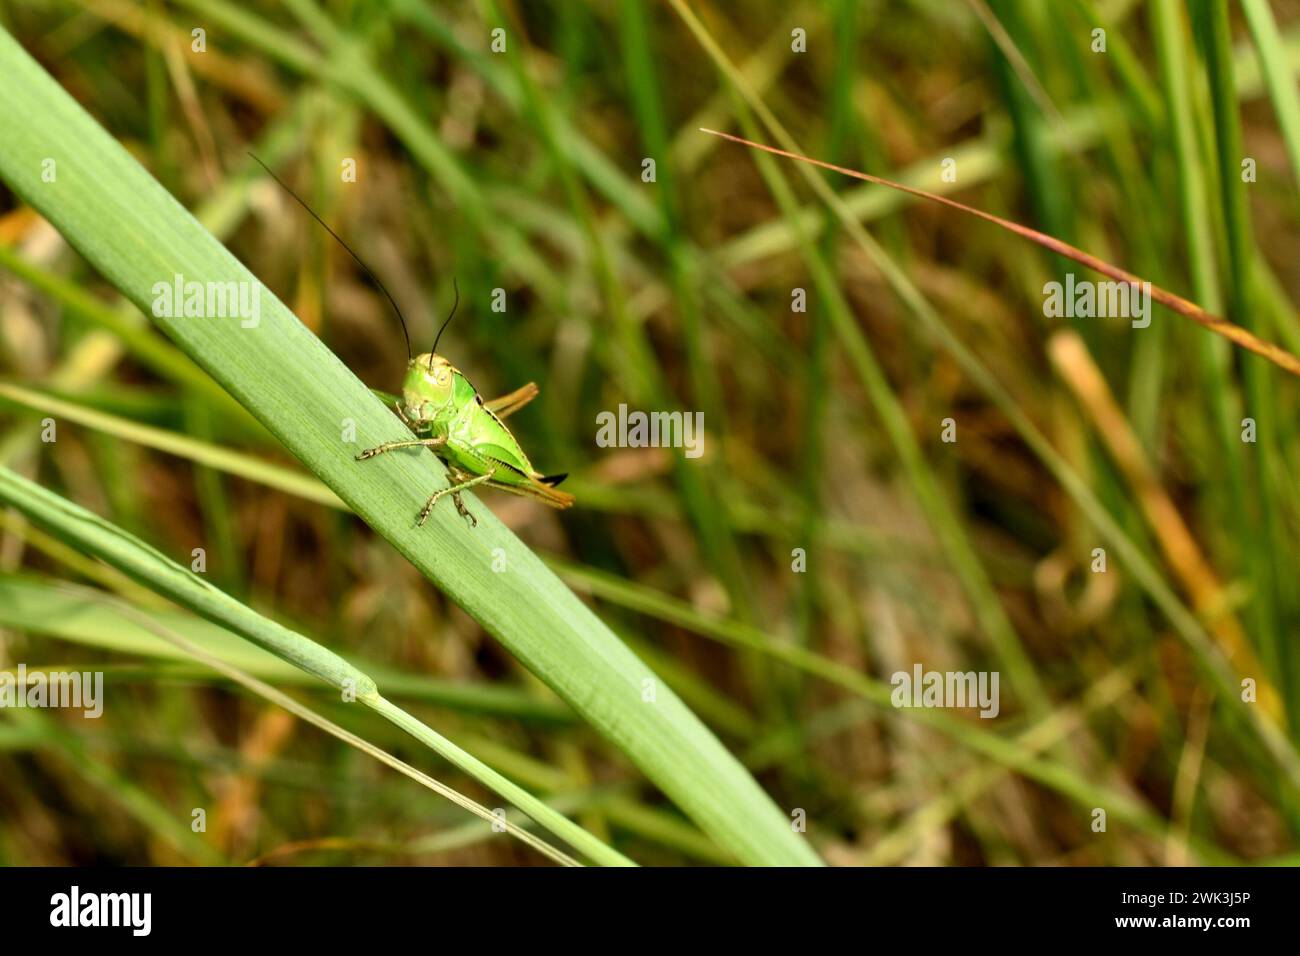 A green grasshopper sits on the grass, he is ready to jump. Side view of a grasshopper. Stock Photo